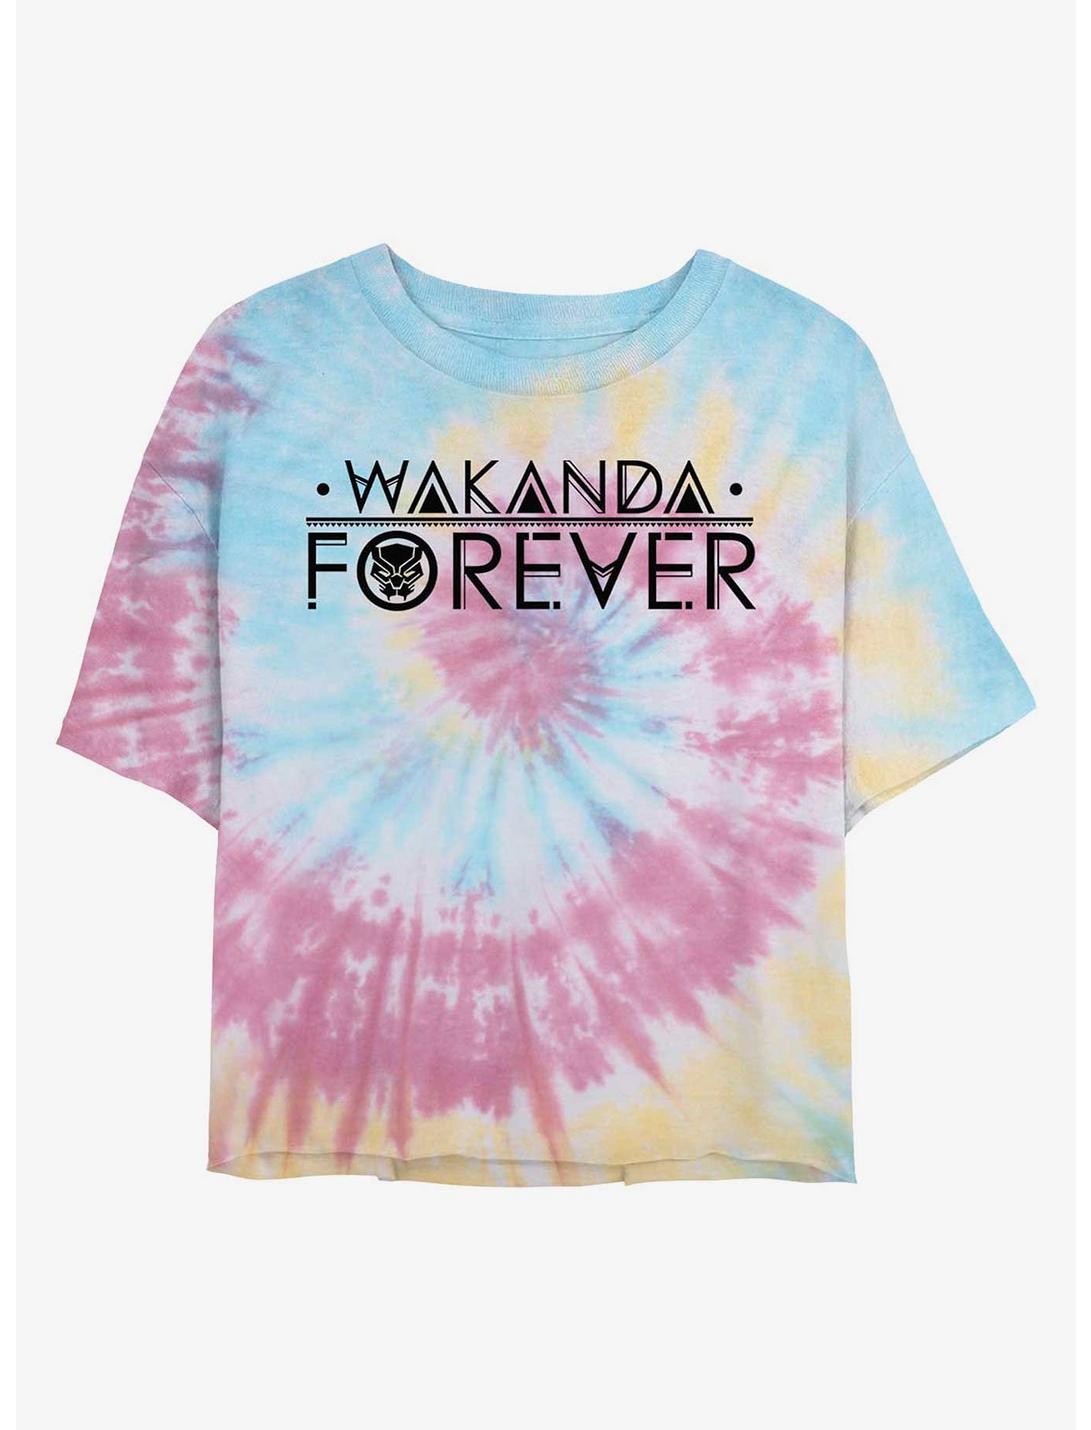 Marvel Black Panther Wakanda Forever Womens Tie-Dye Crop T-Shirt, BLUPNKLY, hi-res